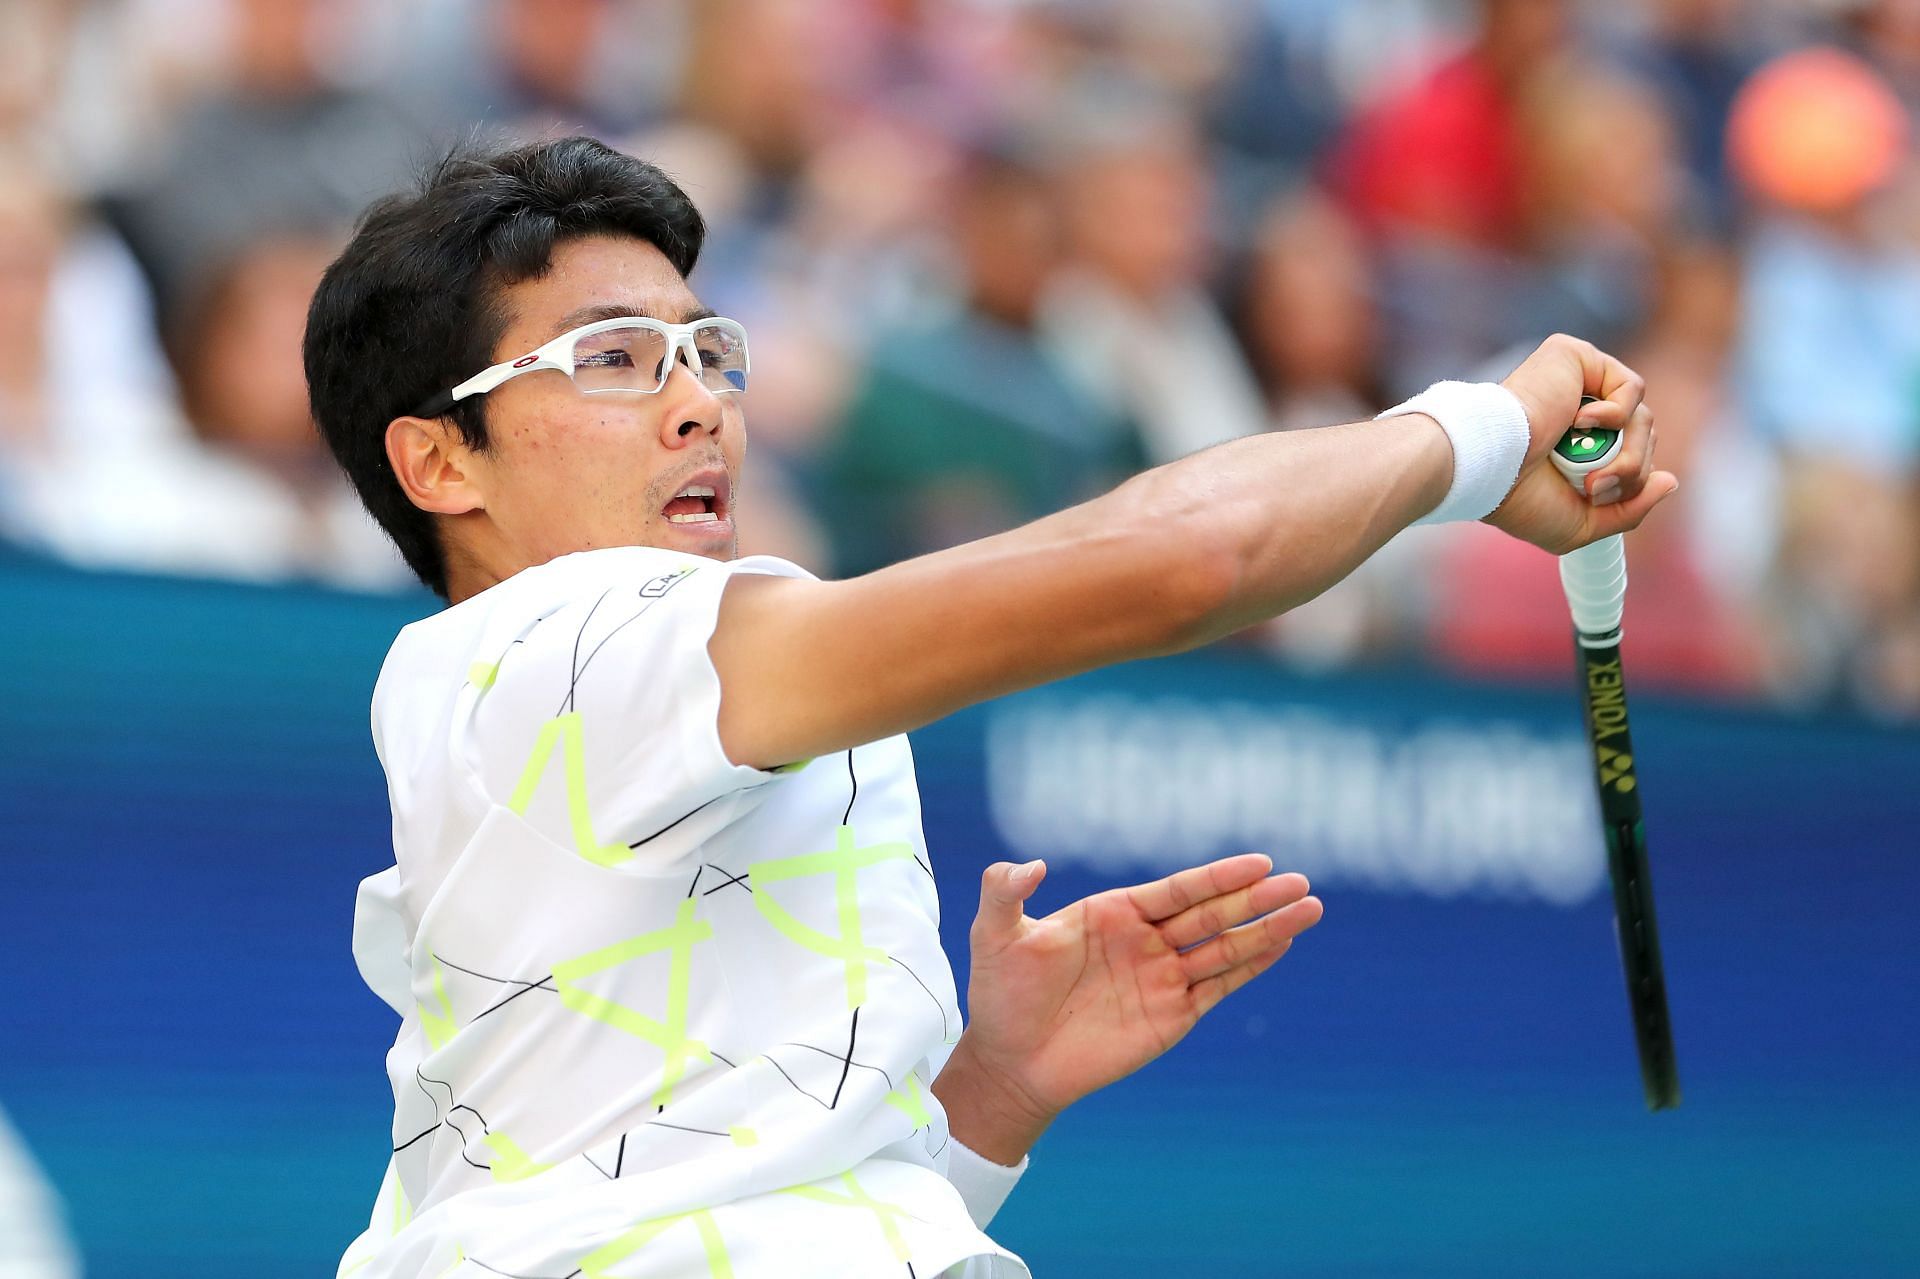 Chung Hyeon beat Daniil Medvedev and Andrey Rublev to win the NextGen ATP Finals